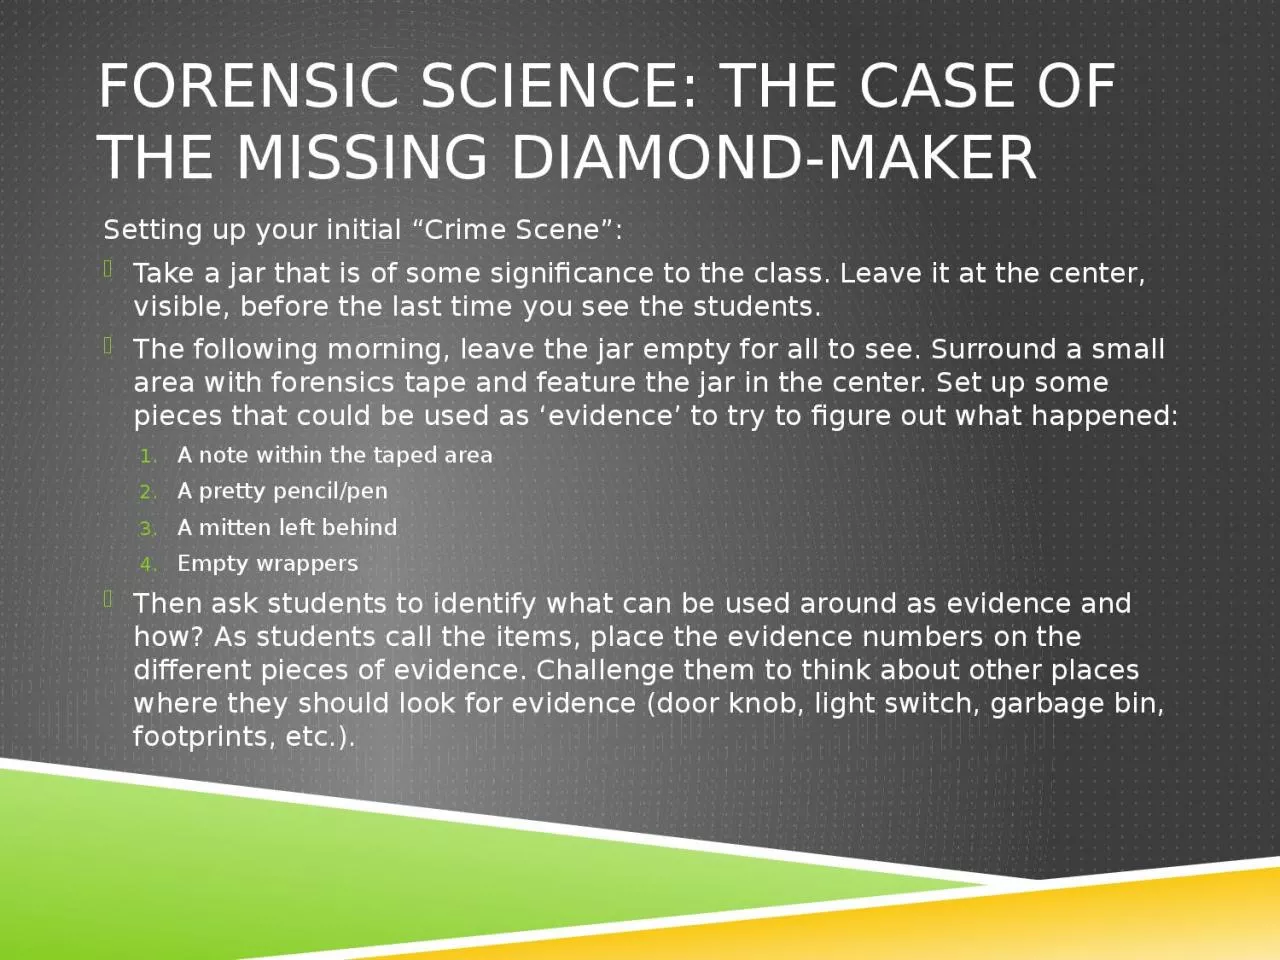 Forensic Science: The Case of the Missing Diamond-Maker